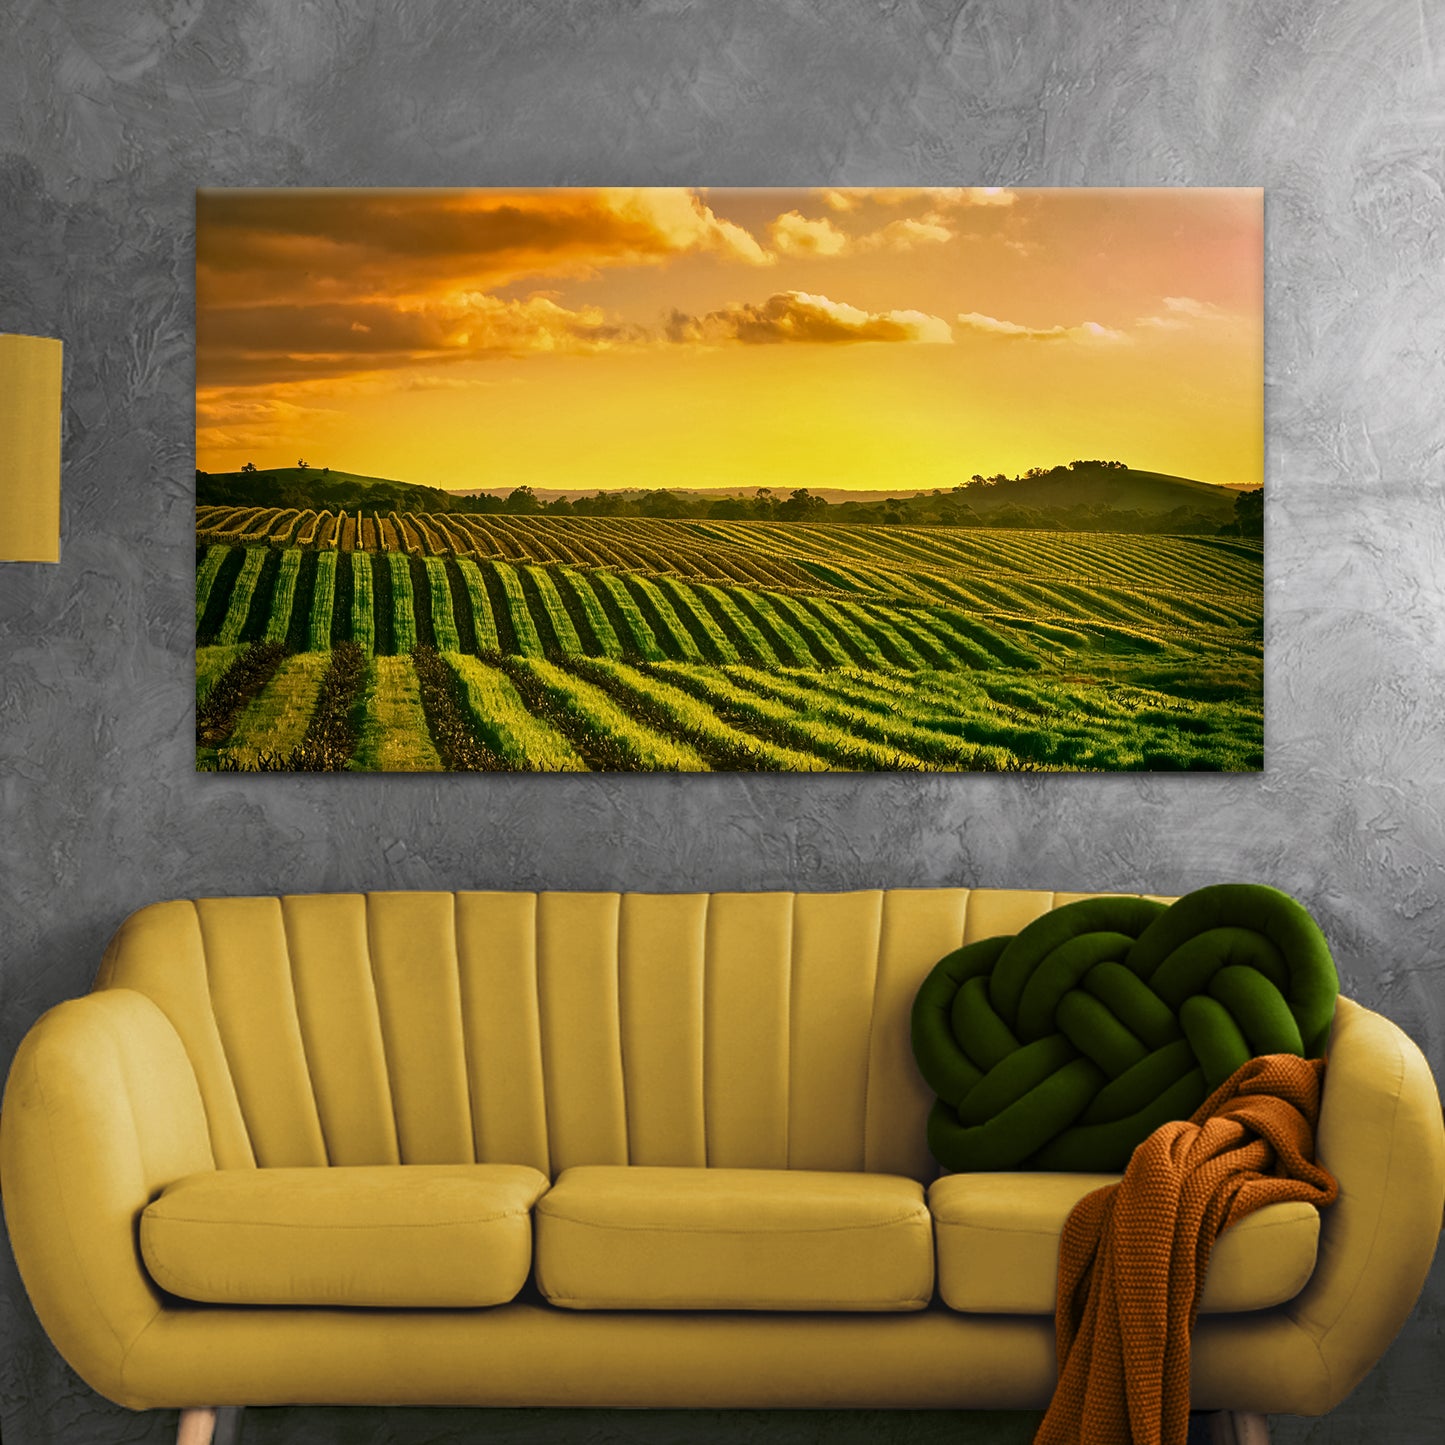 Sunset In Barossa Vineyard Canvas Wall Art Style 2 - Image by Tailored Canvases